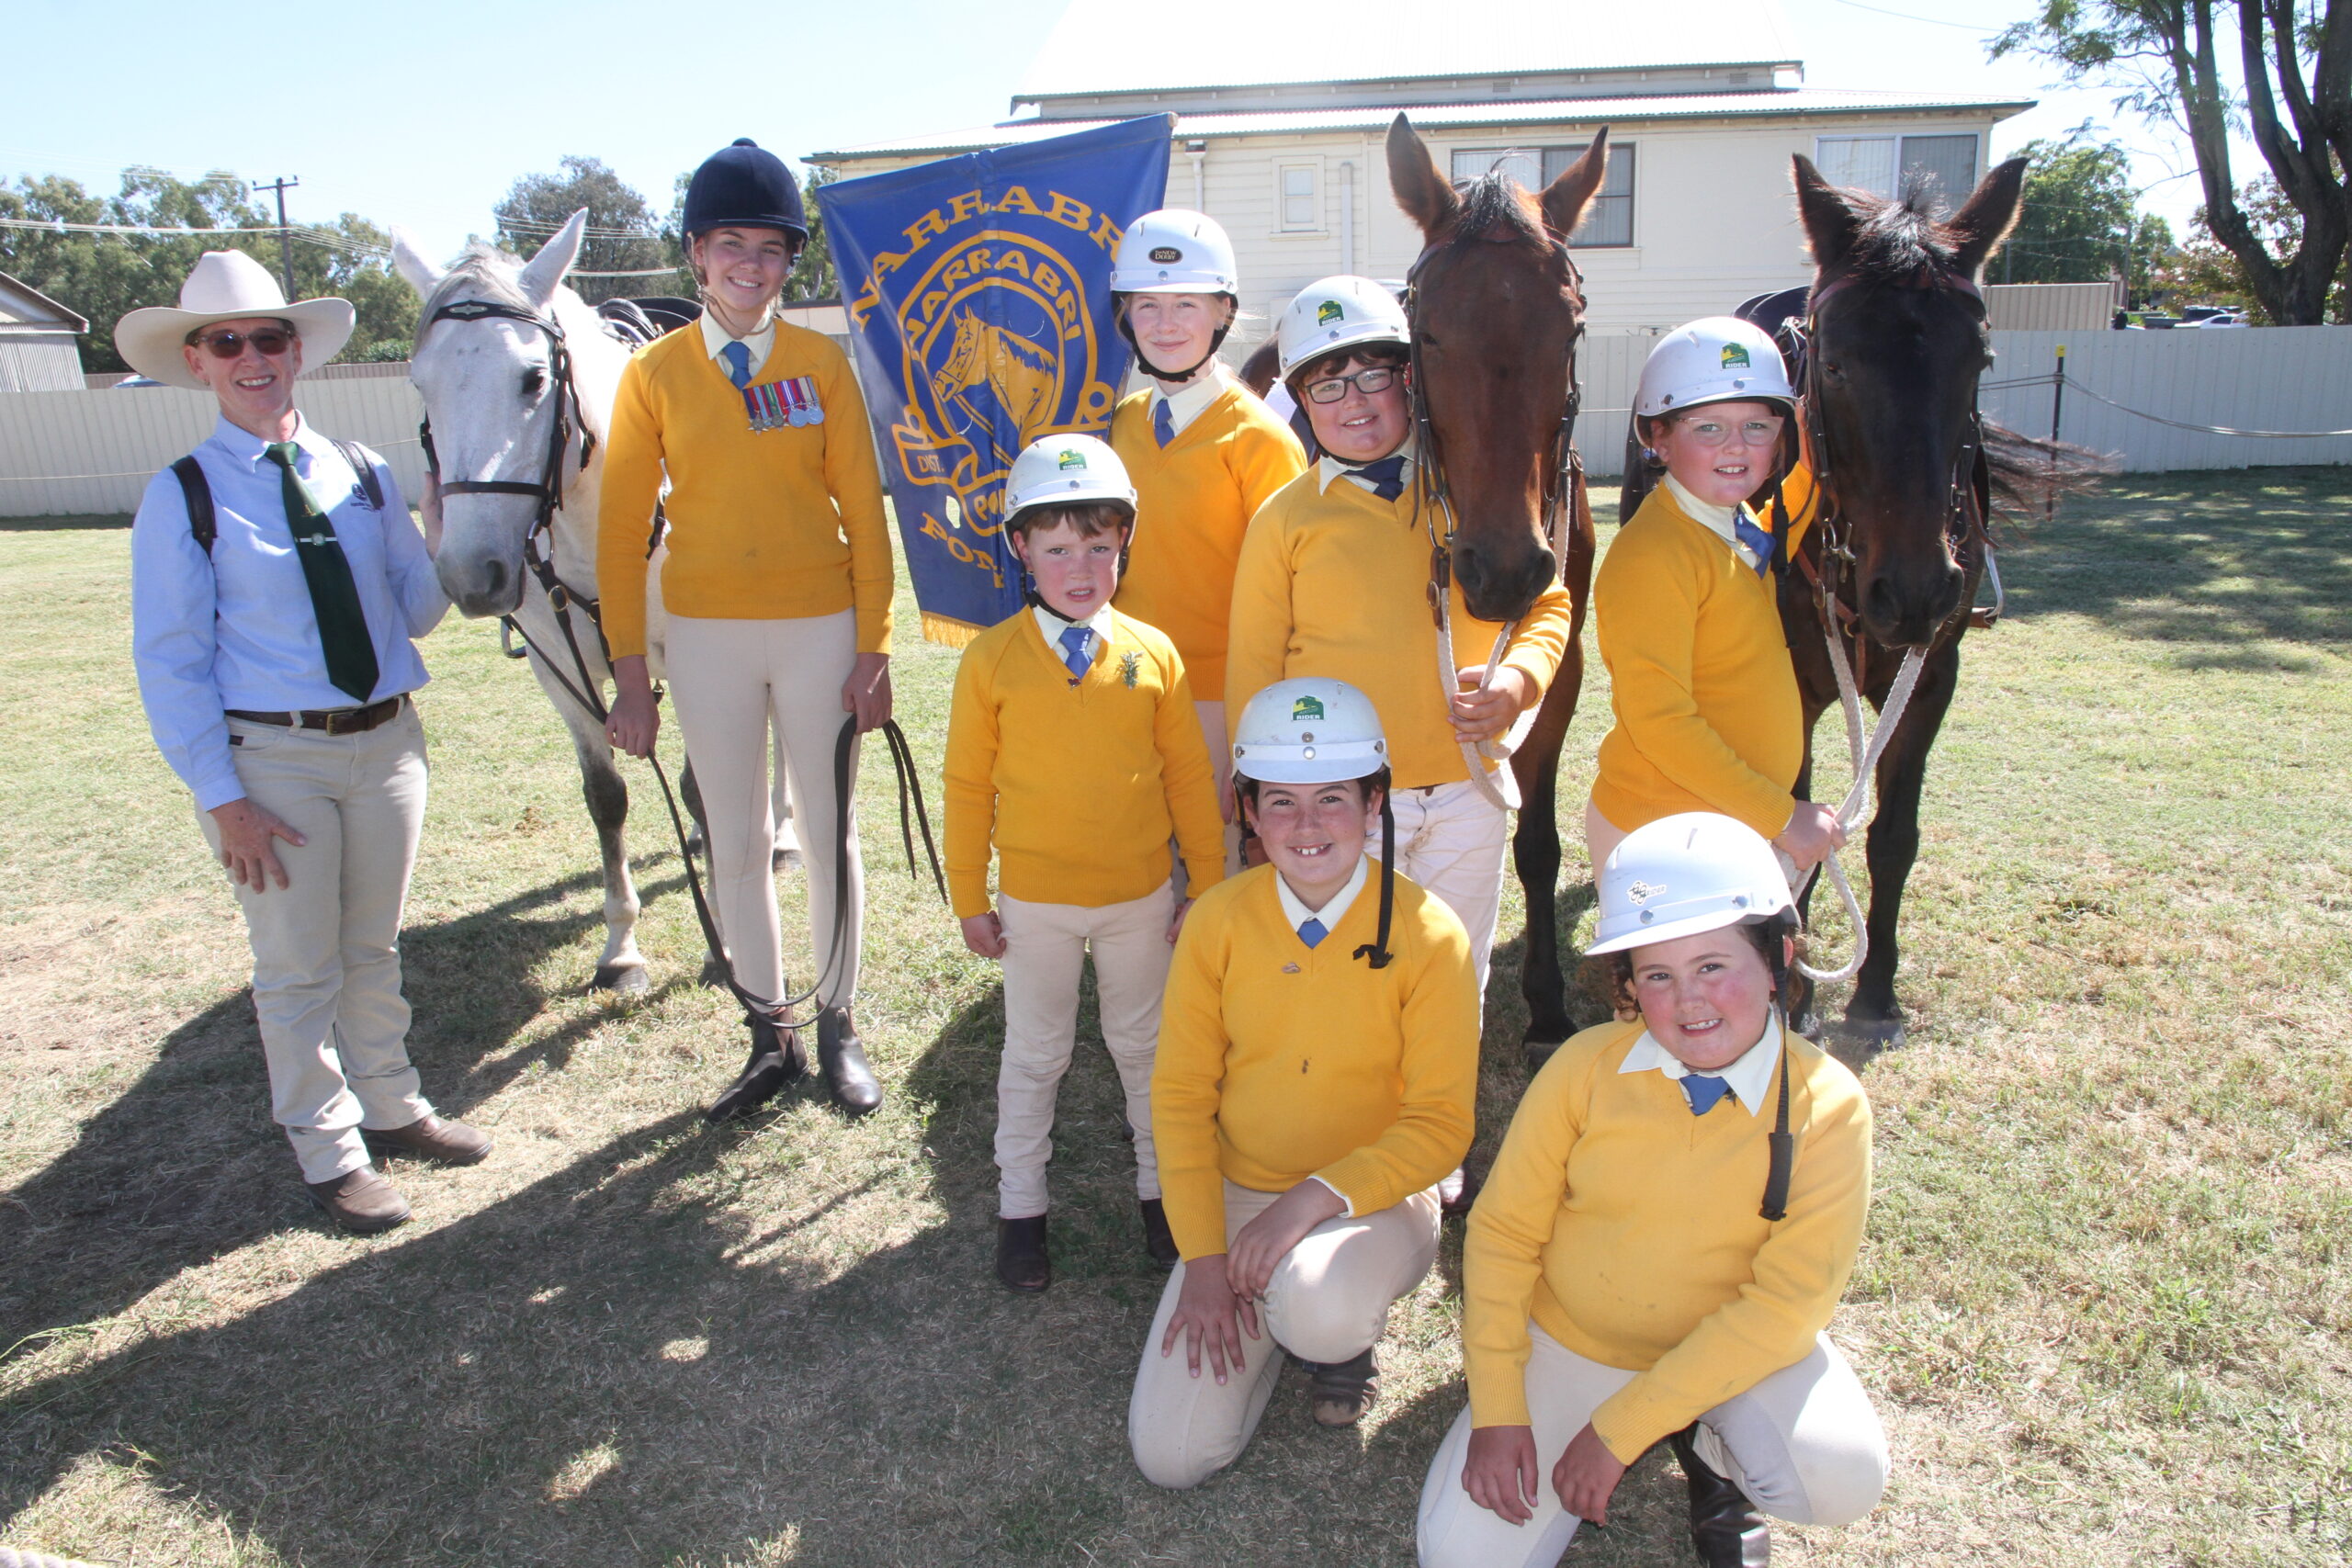 Narrabri Pony Club contingent, senior instructor Kylie Dampney, Piper Williams, Eliza Dampney, Max Booby, Lucy Booby, front, Angus Booby, Isabelle Chappel and Sophie Chappell with horses Freckle, Danny and Josie.